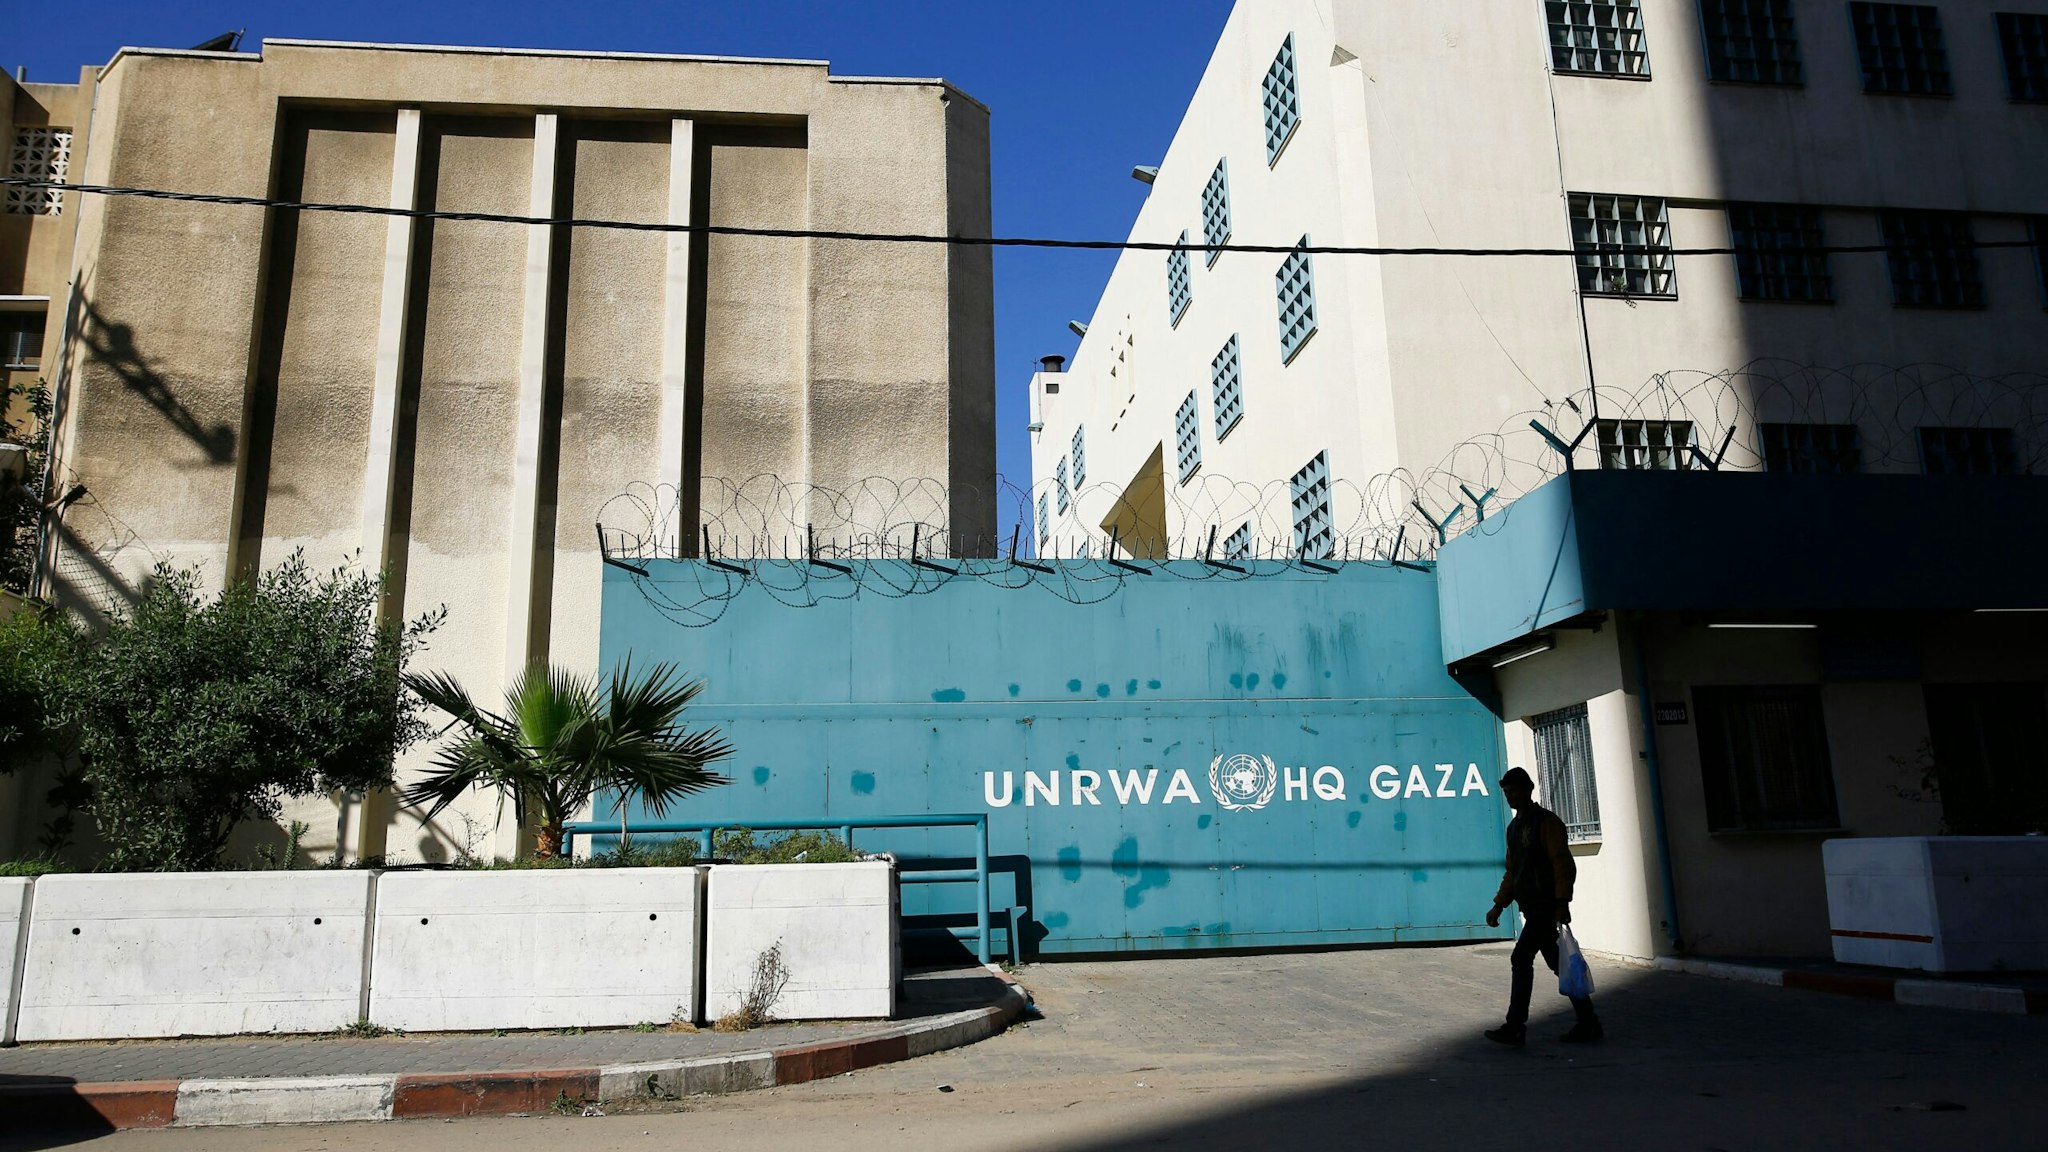 A Palestinian man walks past the building of the UNRWA headquarters in Gaza City on January 8, 2018. - Israeli Prime Minister Benjamin Netanyahu called for the closure of the United Nations agency for Palestinian refugees, days after US President Donald Trump threatened to cut Palestinian aid.